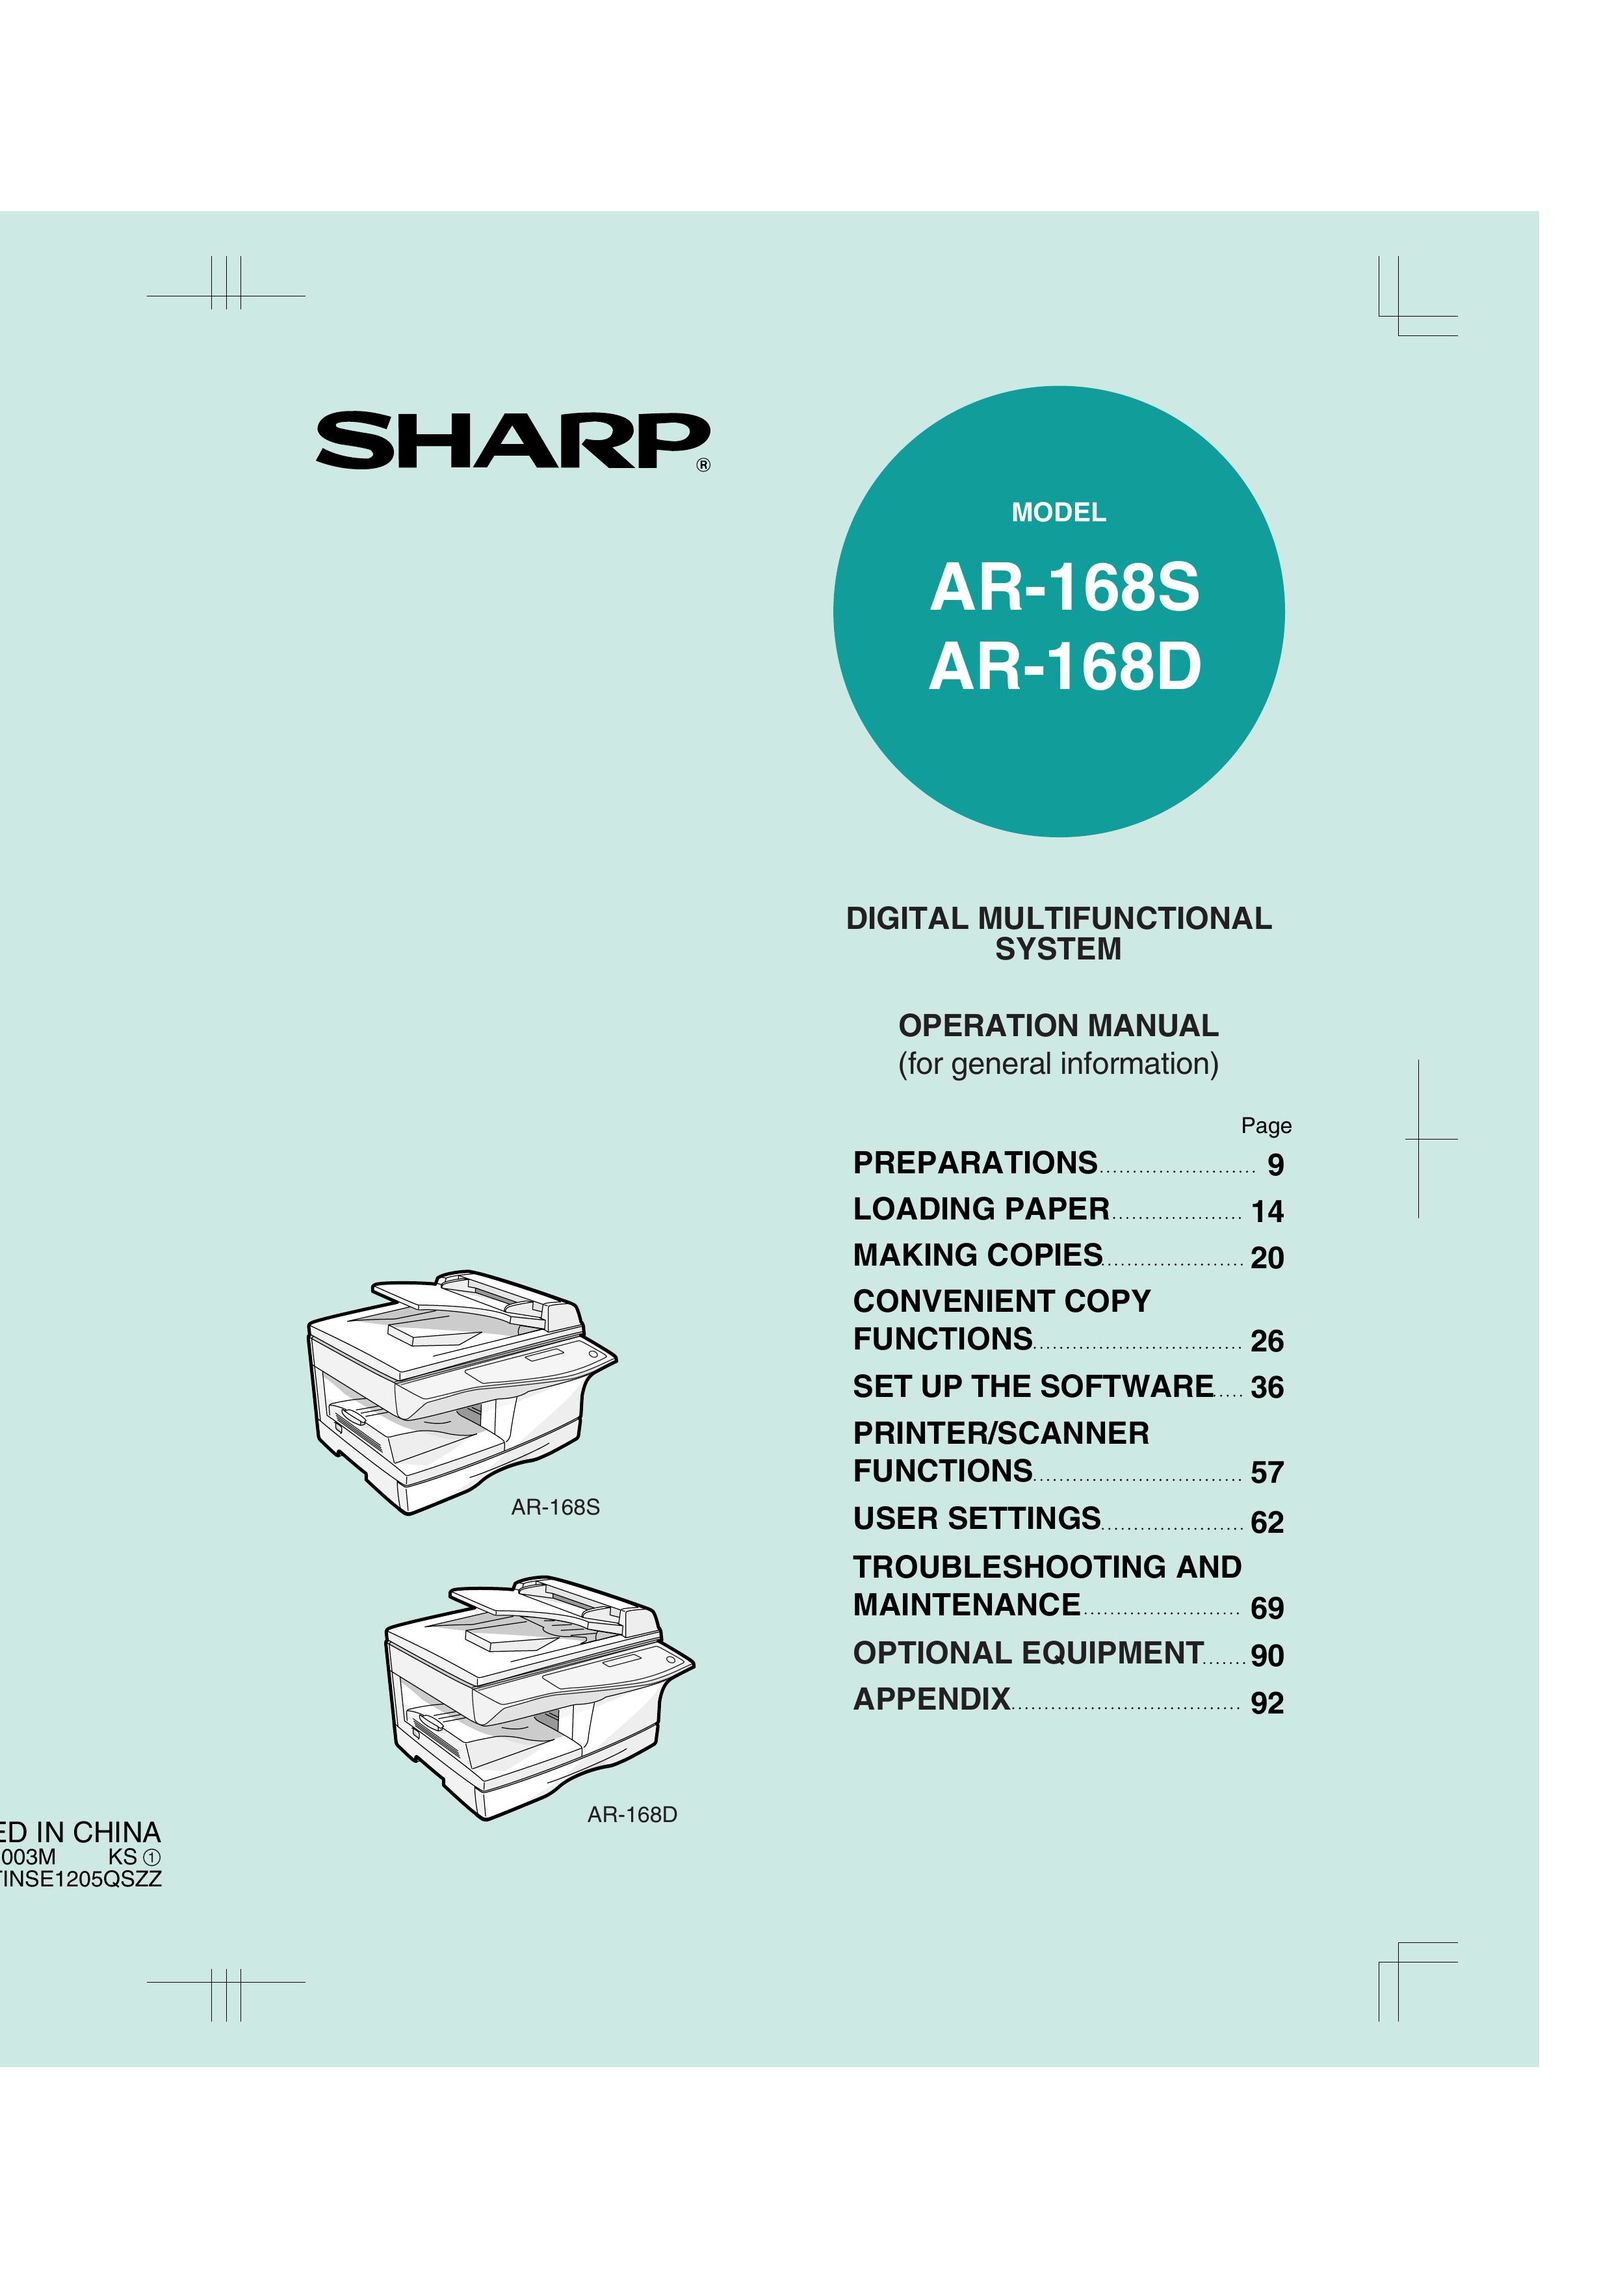 Sharp AR-168D All in One Printer User Manual